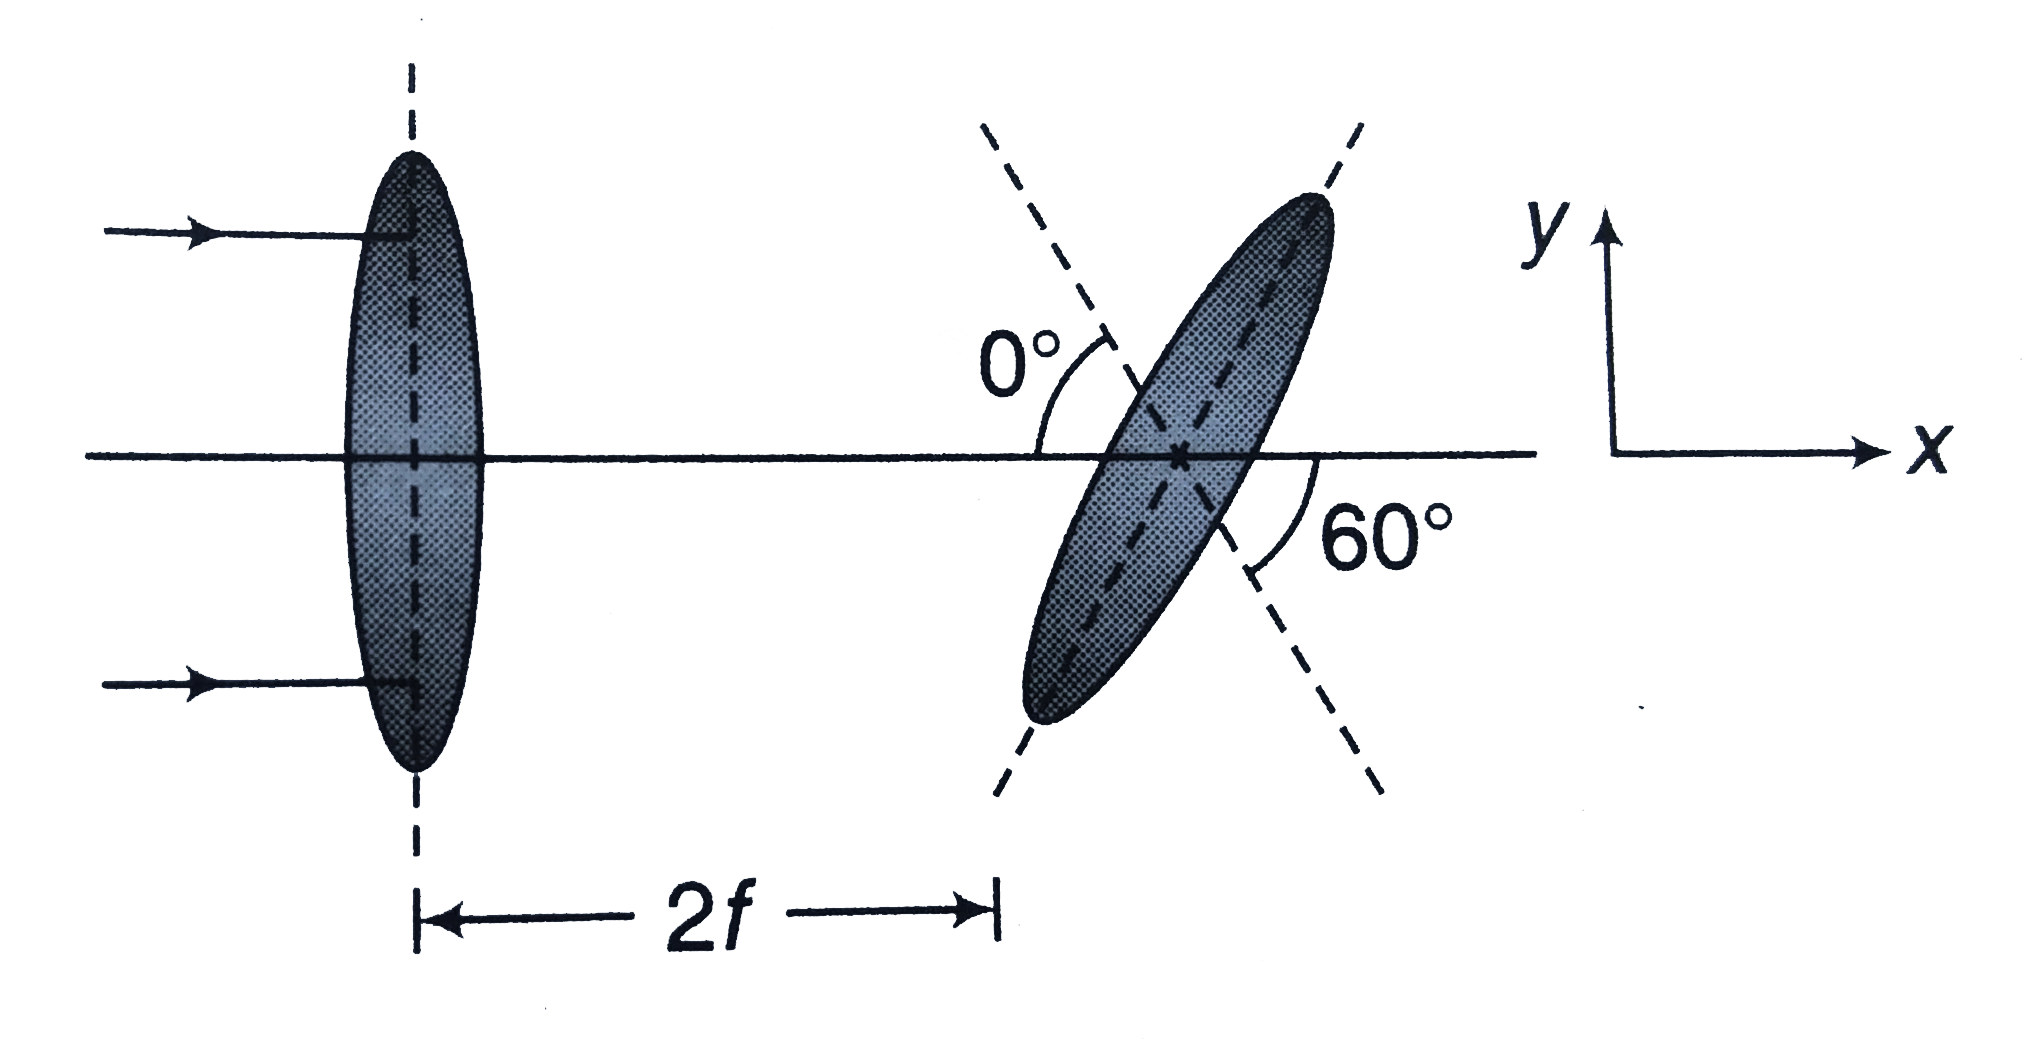 Two converging lenses of the same focal length f are separated by a distance 2f. The axis of the second lens is inclined at angle theta=60^@ with respect to the axis of the first lens. A parallel paraxial beam of light is incident from left side of the lens. Find the coordinates of the final image with respect to the origin of the first lens.